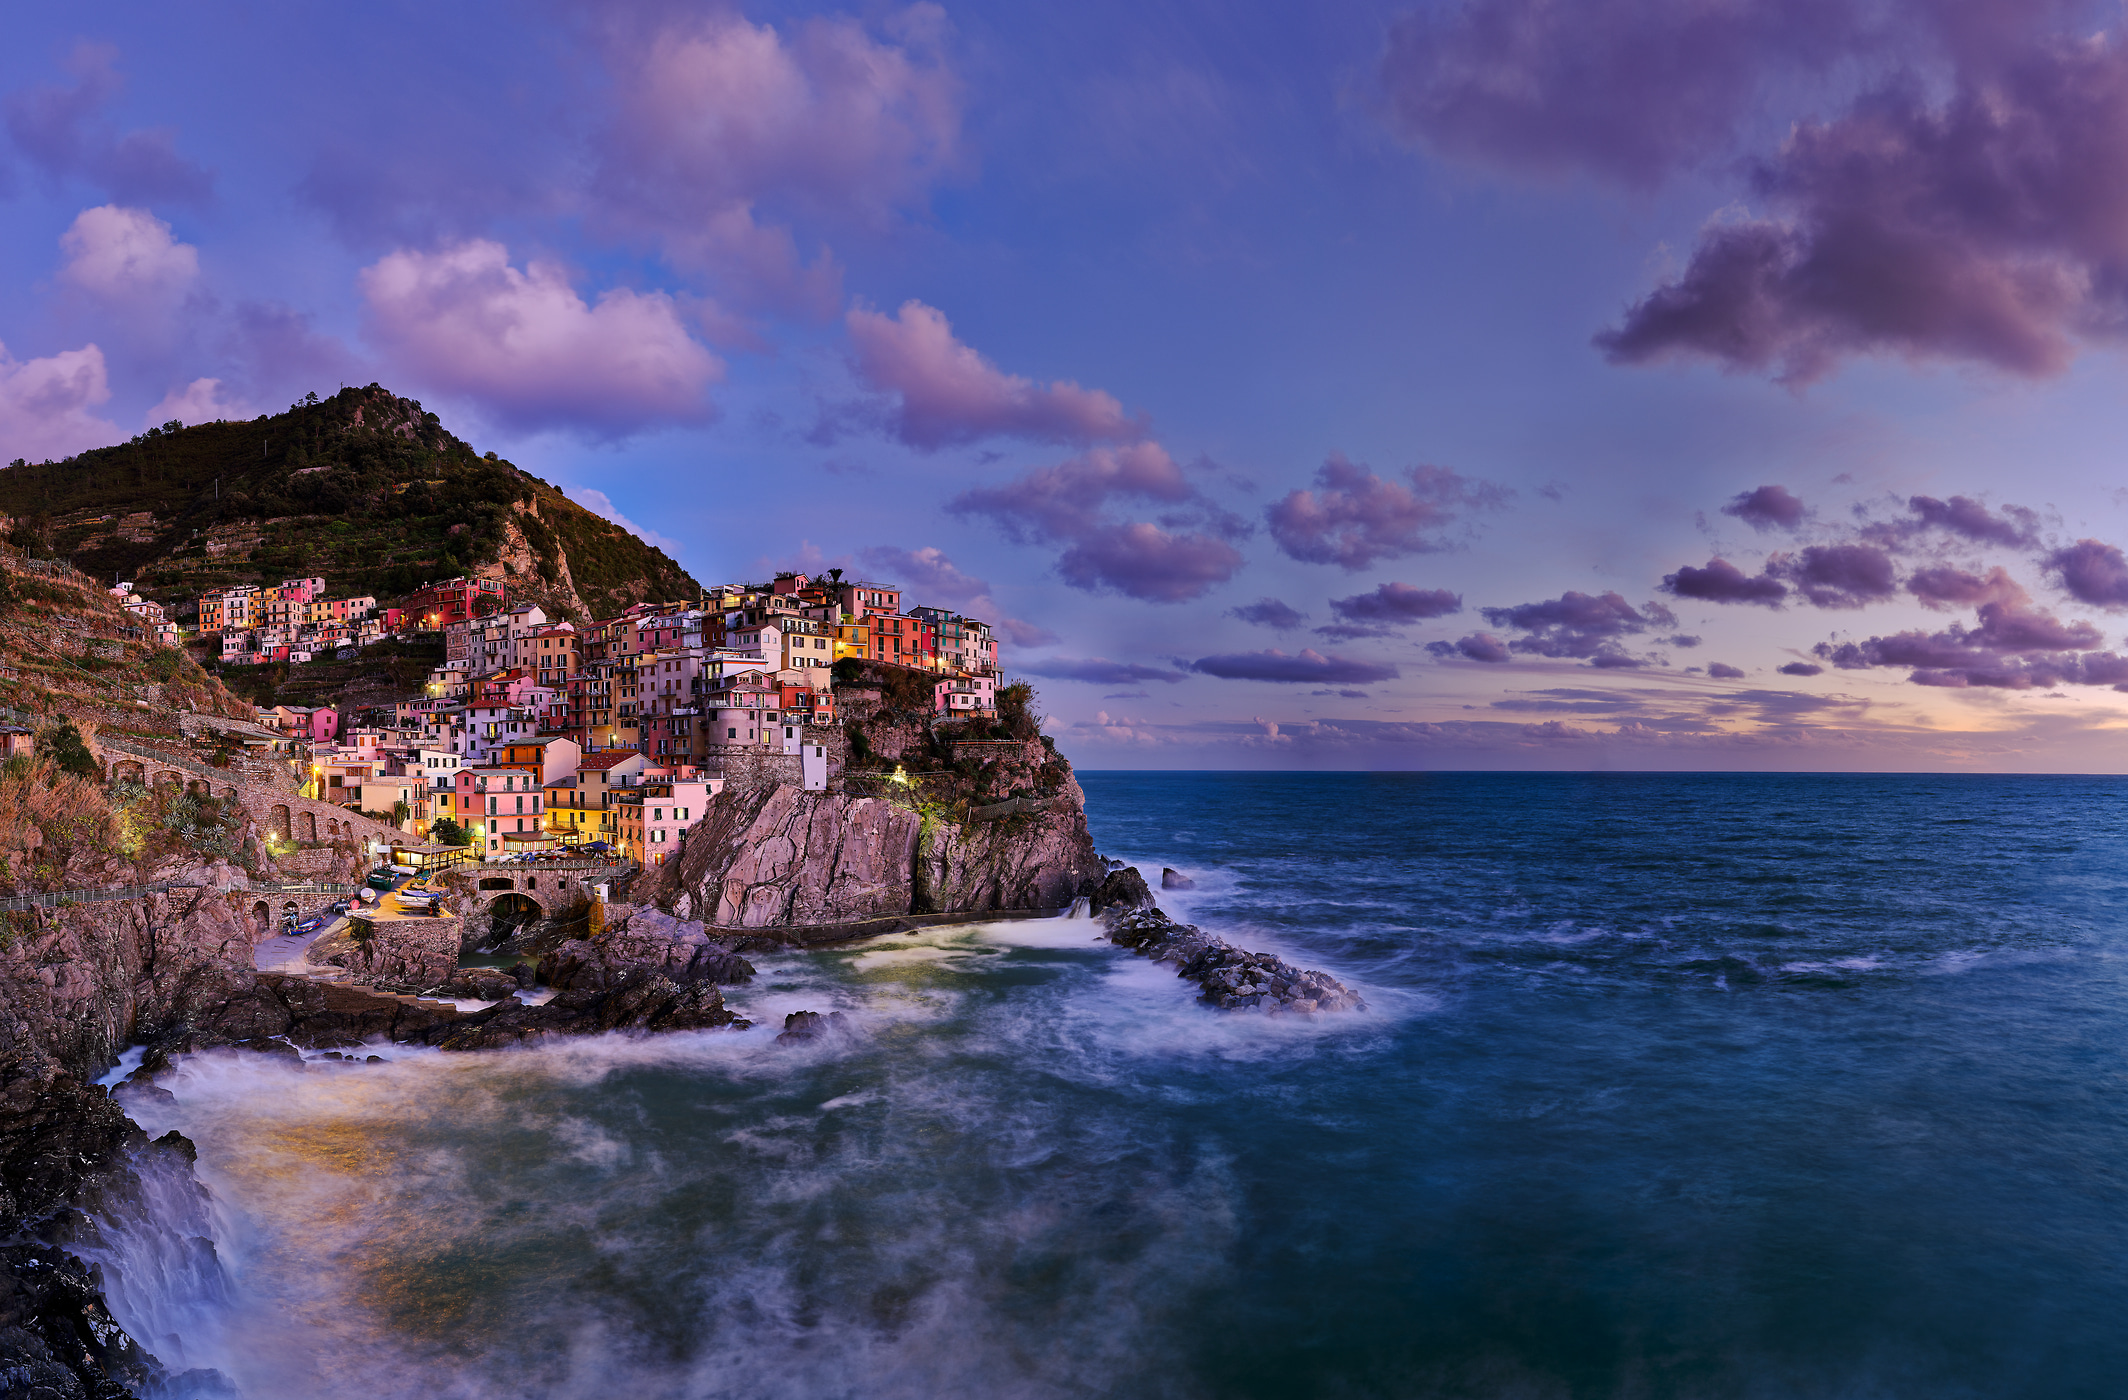 615 megapixels! A very high resolution, large-format VAST photo print of the Italian coastline at sunset; photograph created by David Meaux in Manarola, Cinque Terre, Liguria, Italy.